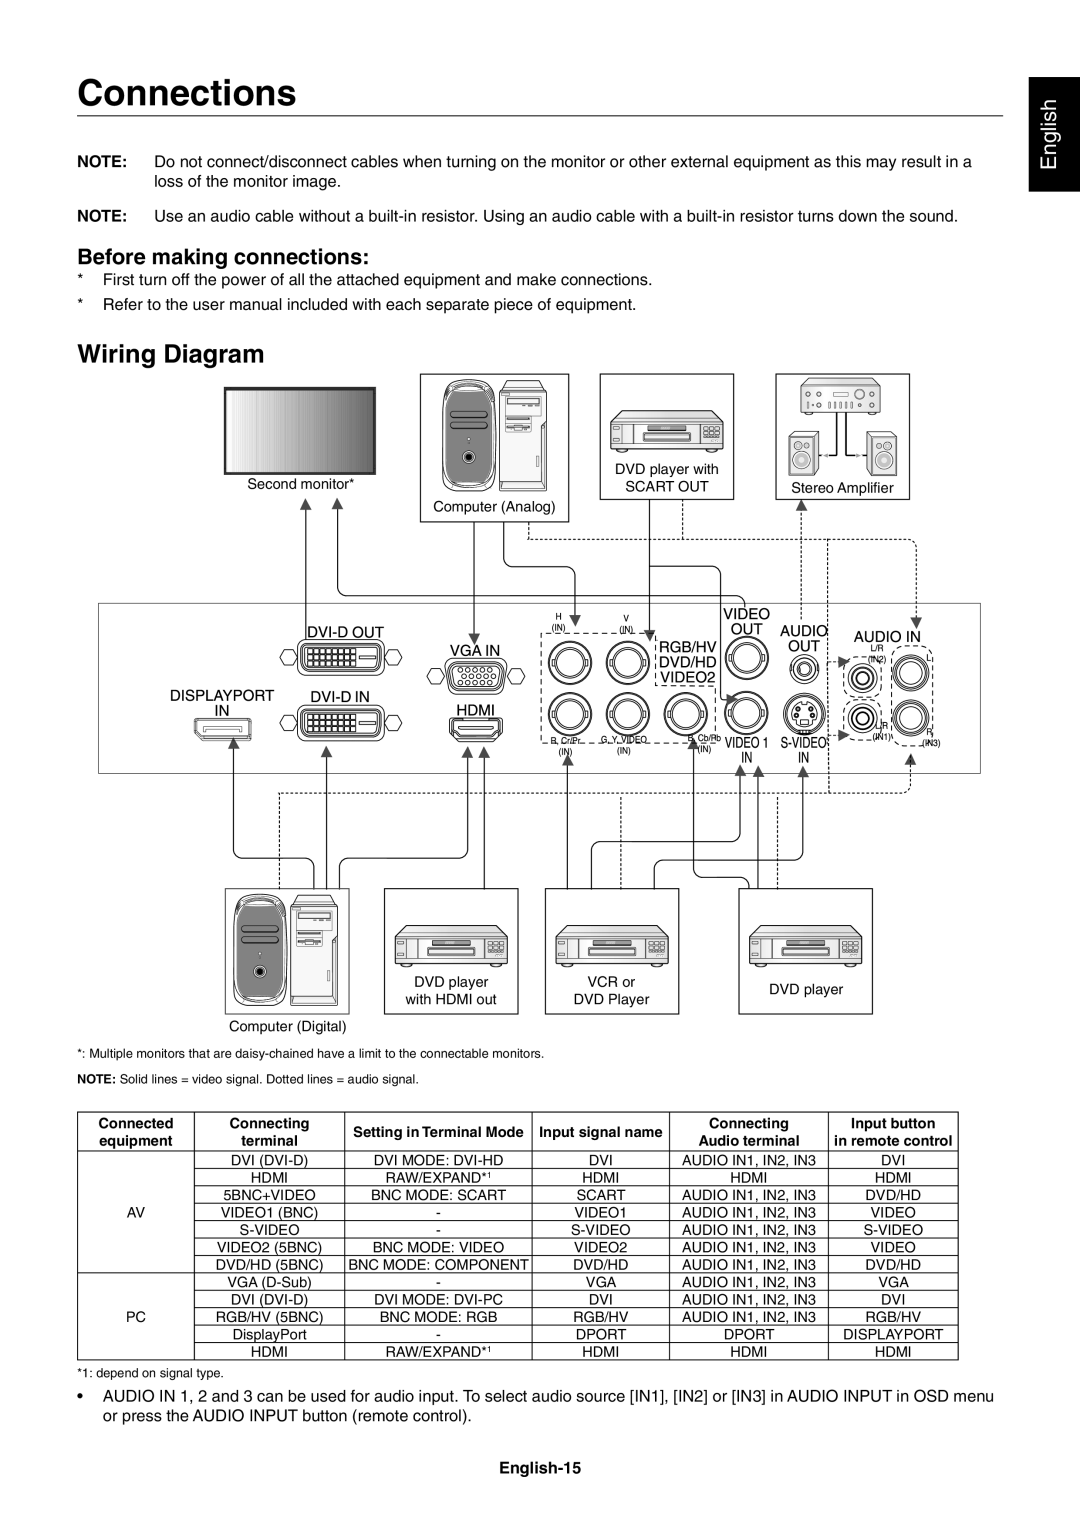 NEC V462, V651 user manual Connections, Wiring Diagram, Before making connections, English 